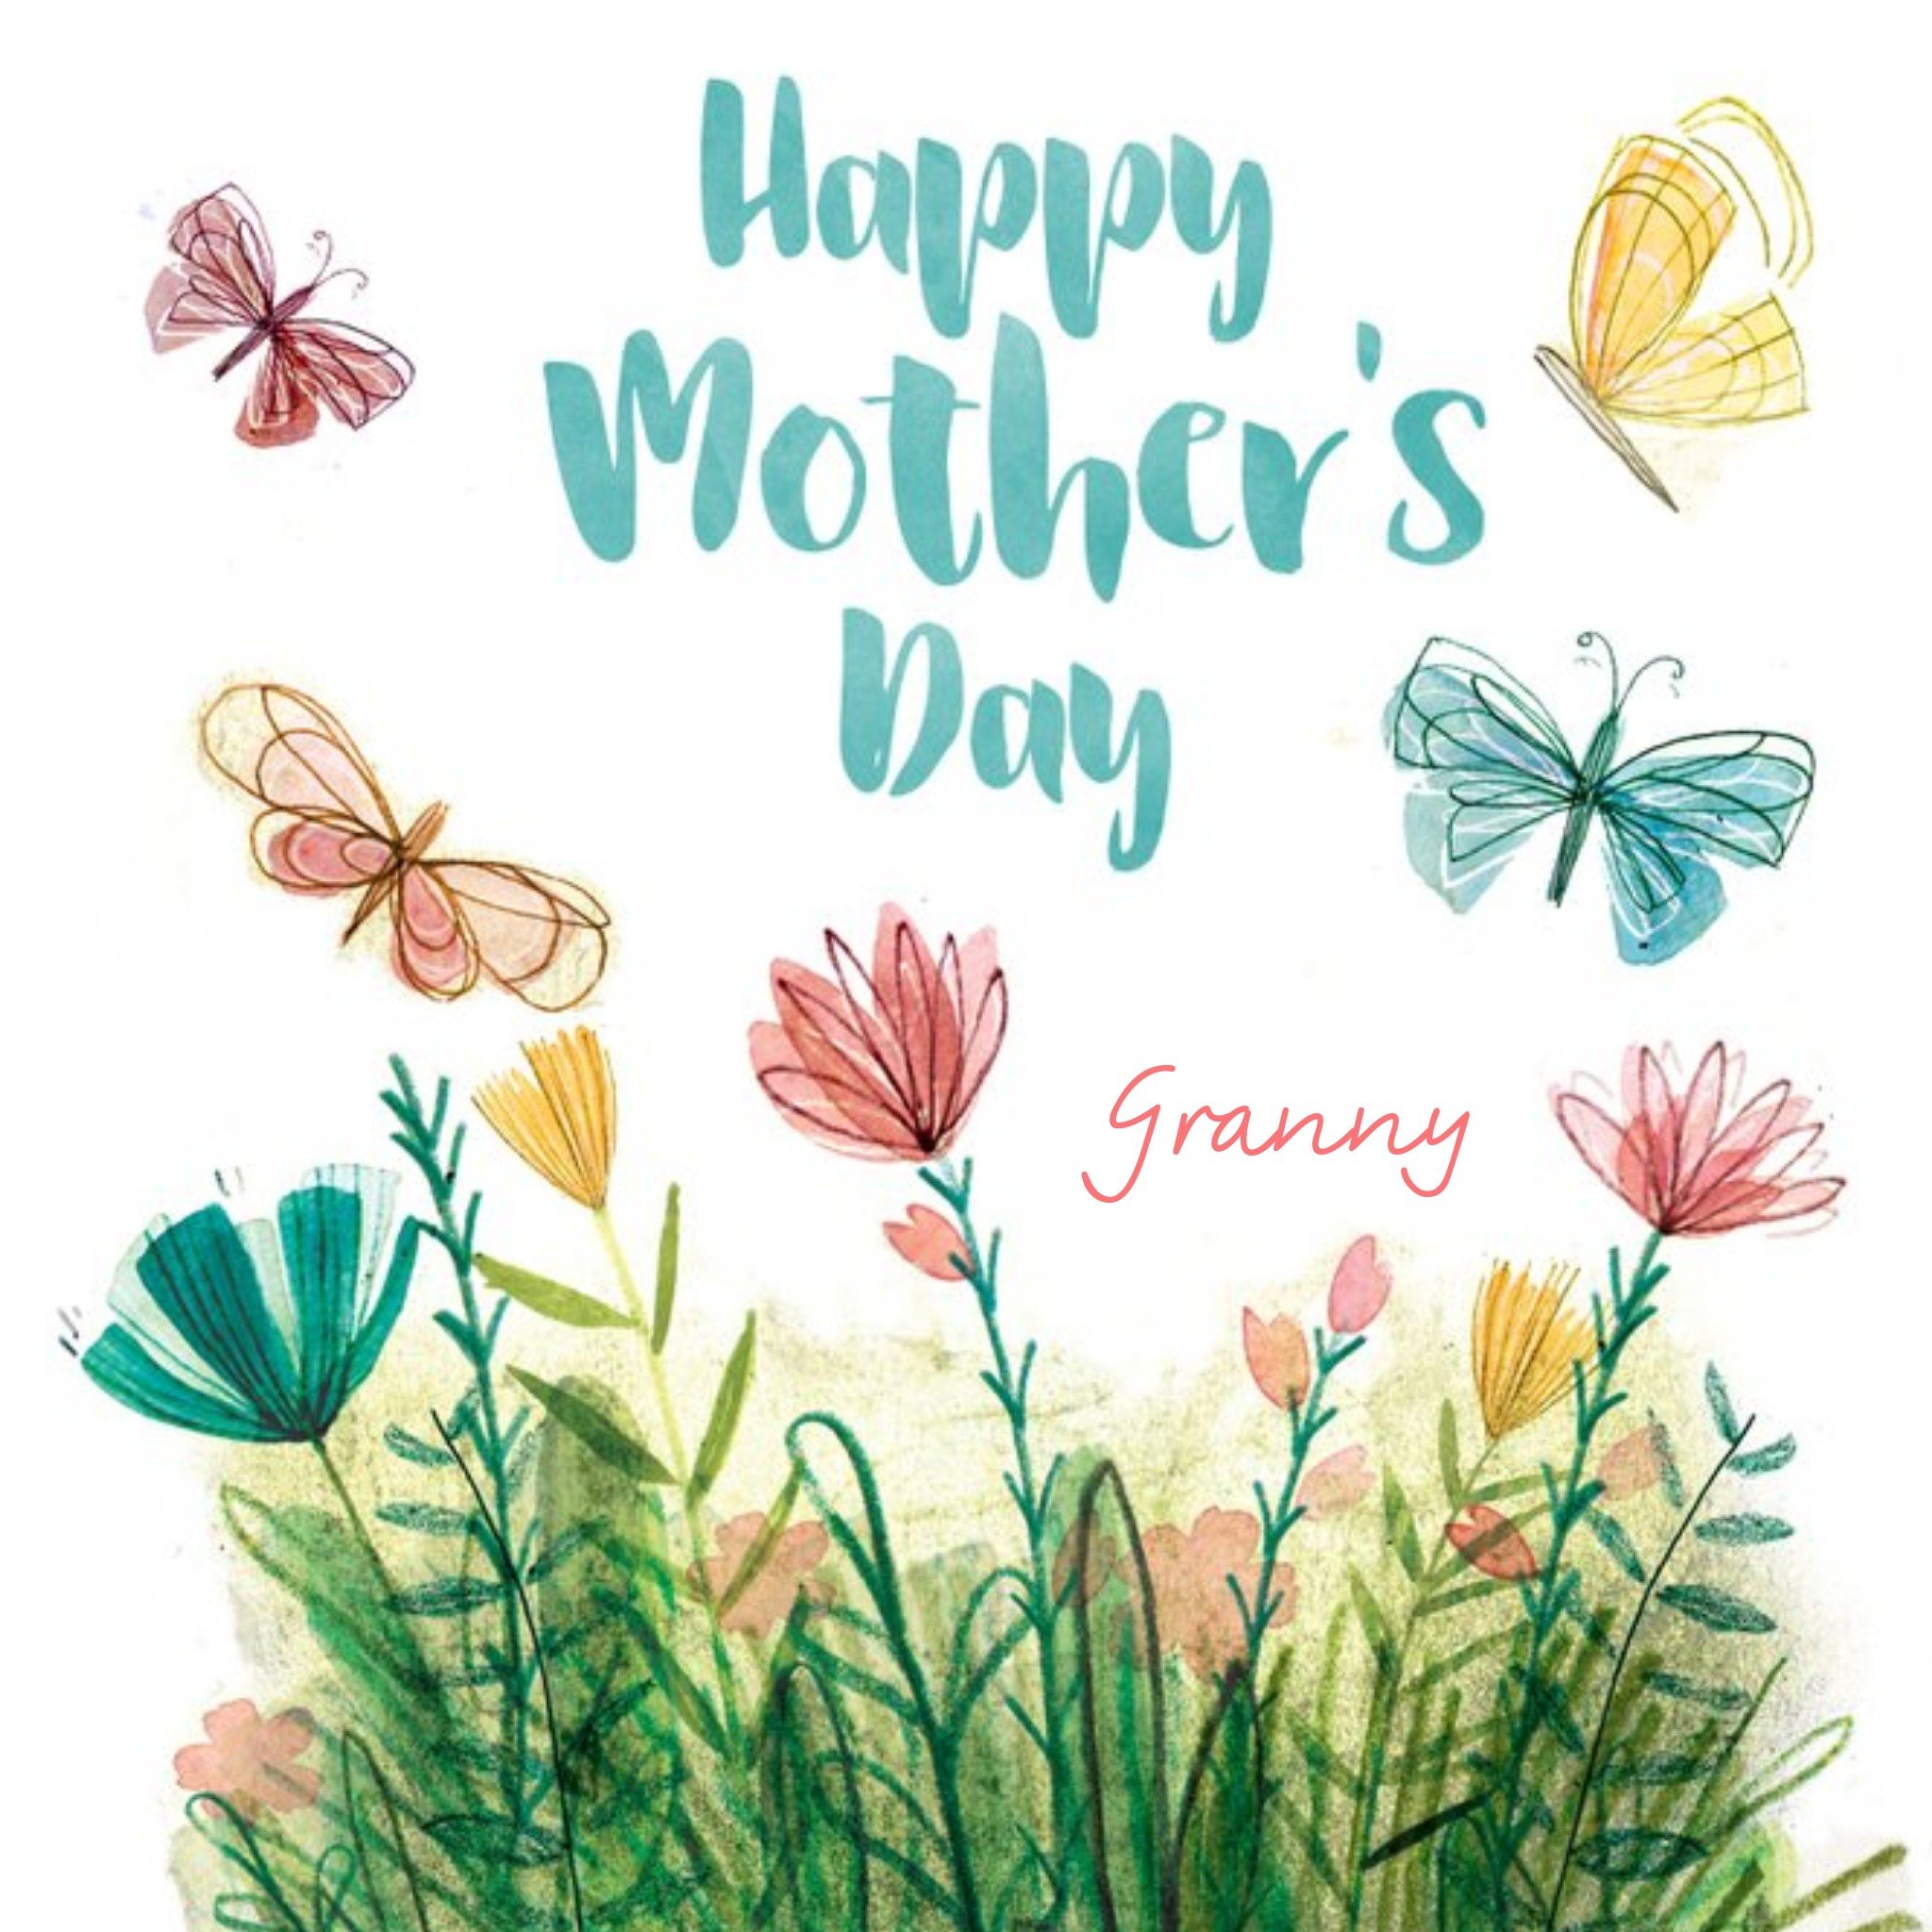 Moonpig Mother's Day Card - Granny - Floral, Large